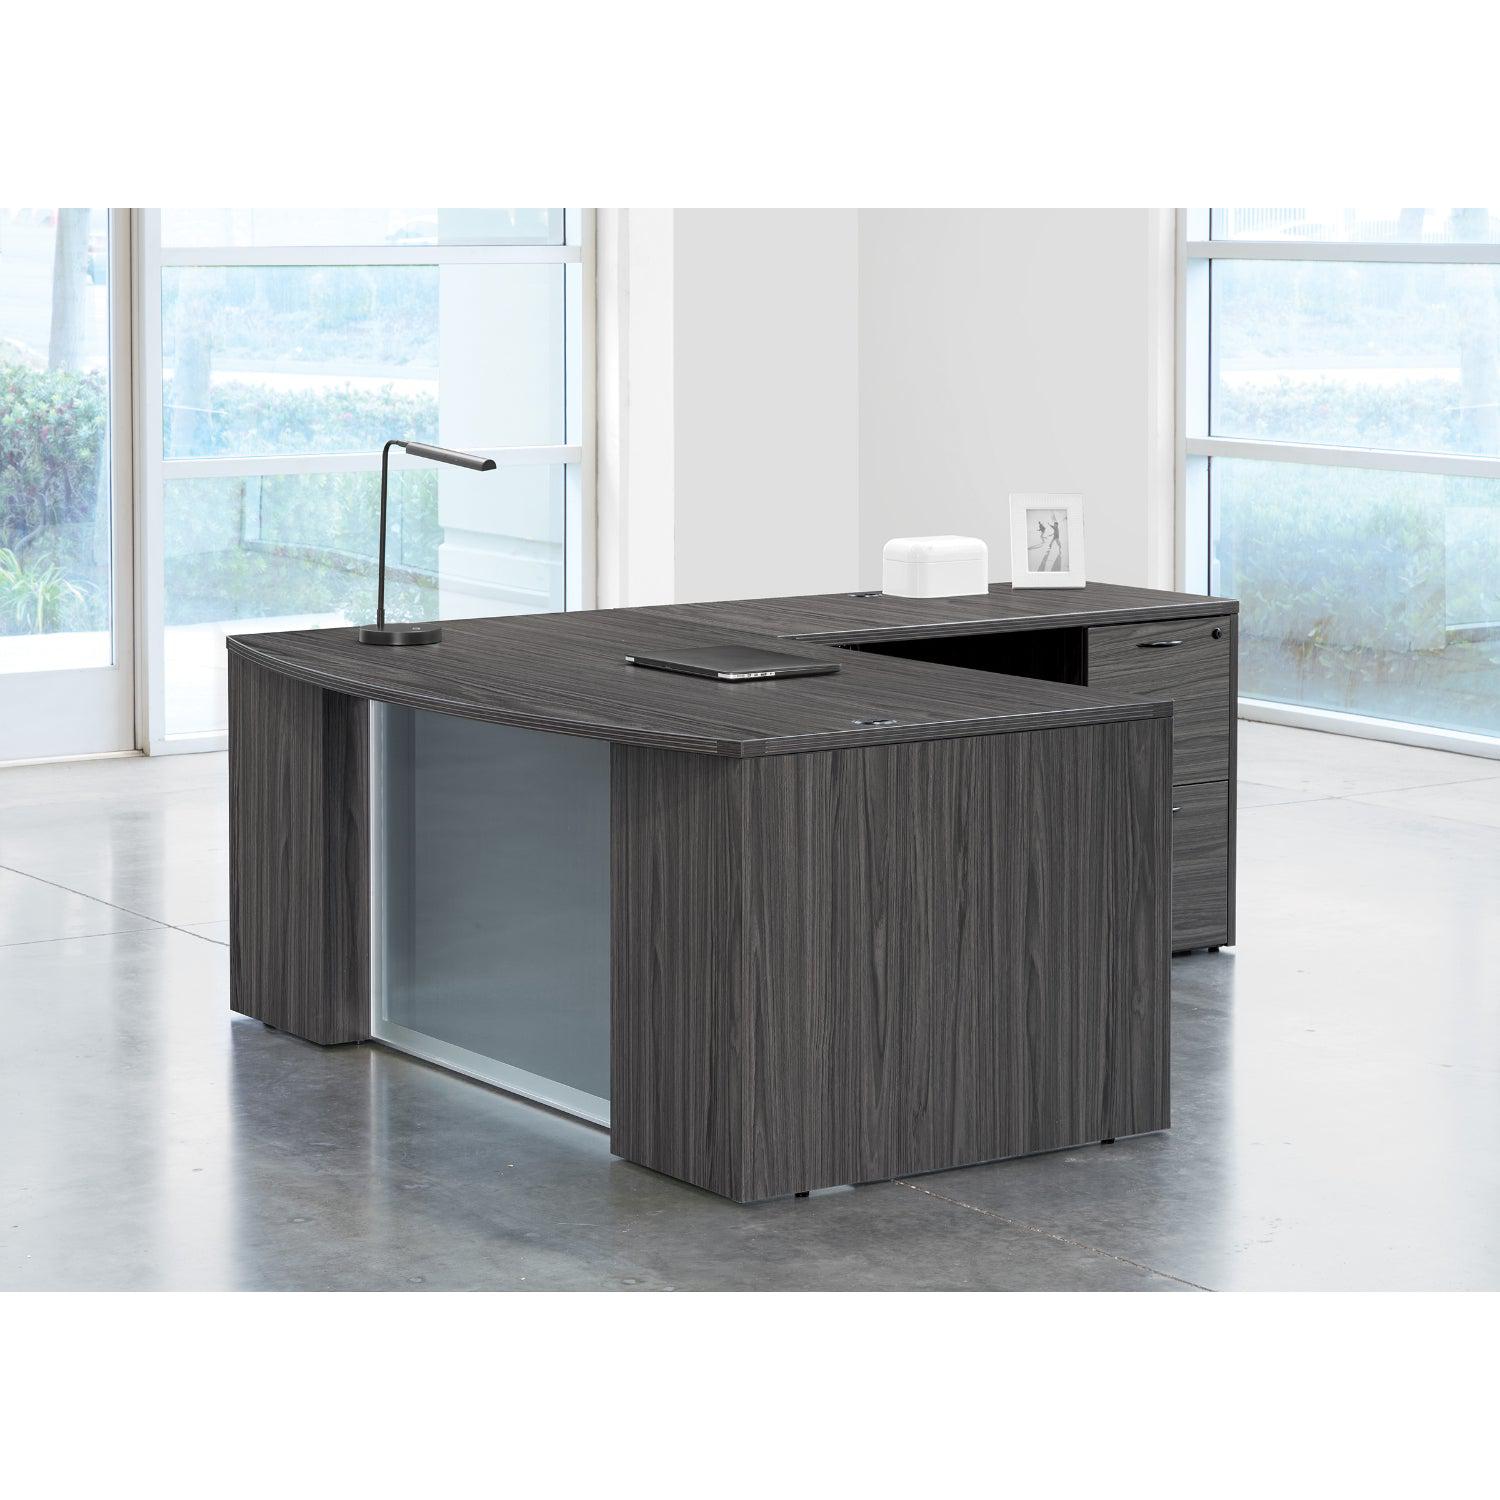 Napa StepFront L Shape with Bow Top Desk and Glass Modesty Panel, 71” x 88”